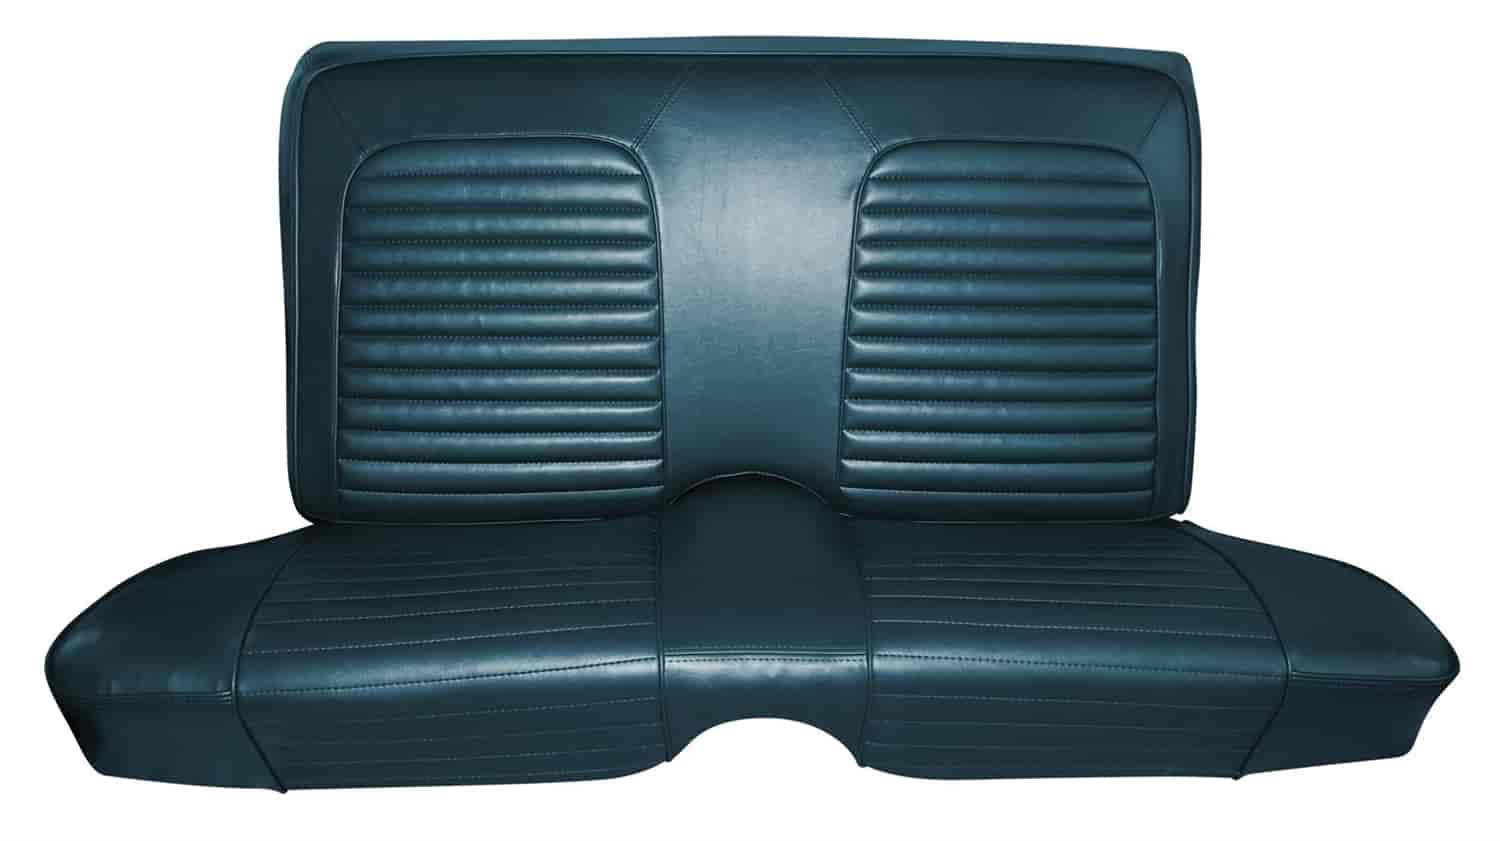 1964 Ford Falcon Futura 2-Door Station Wagon Interior Front and Rear Bench Seat Upholstery Set